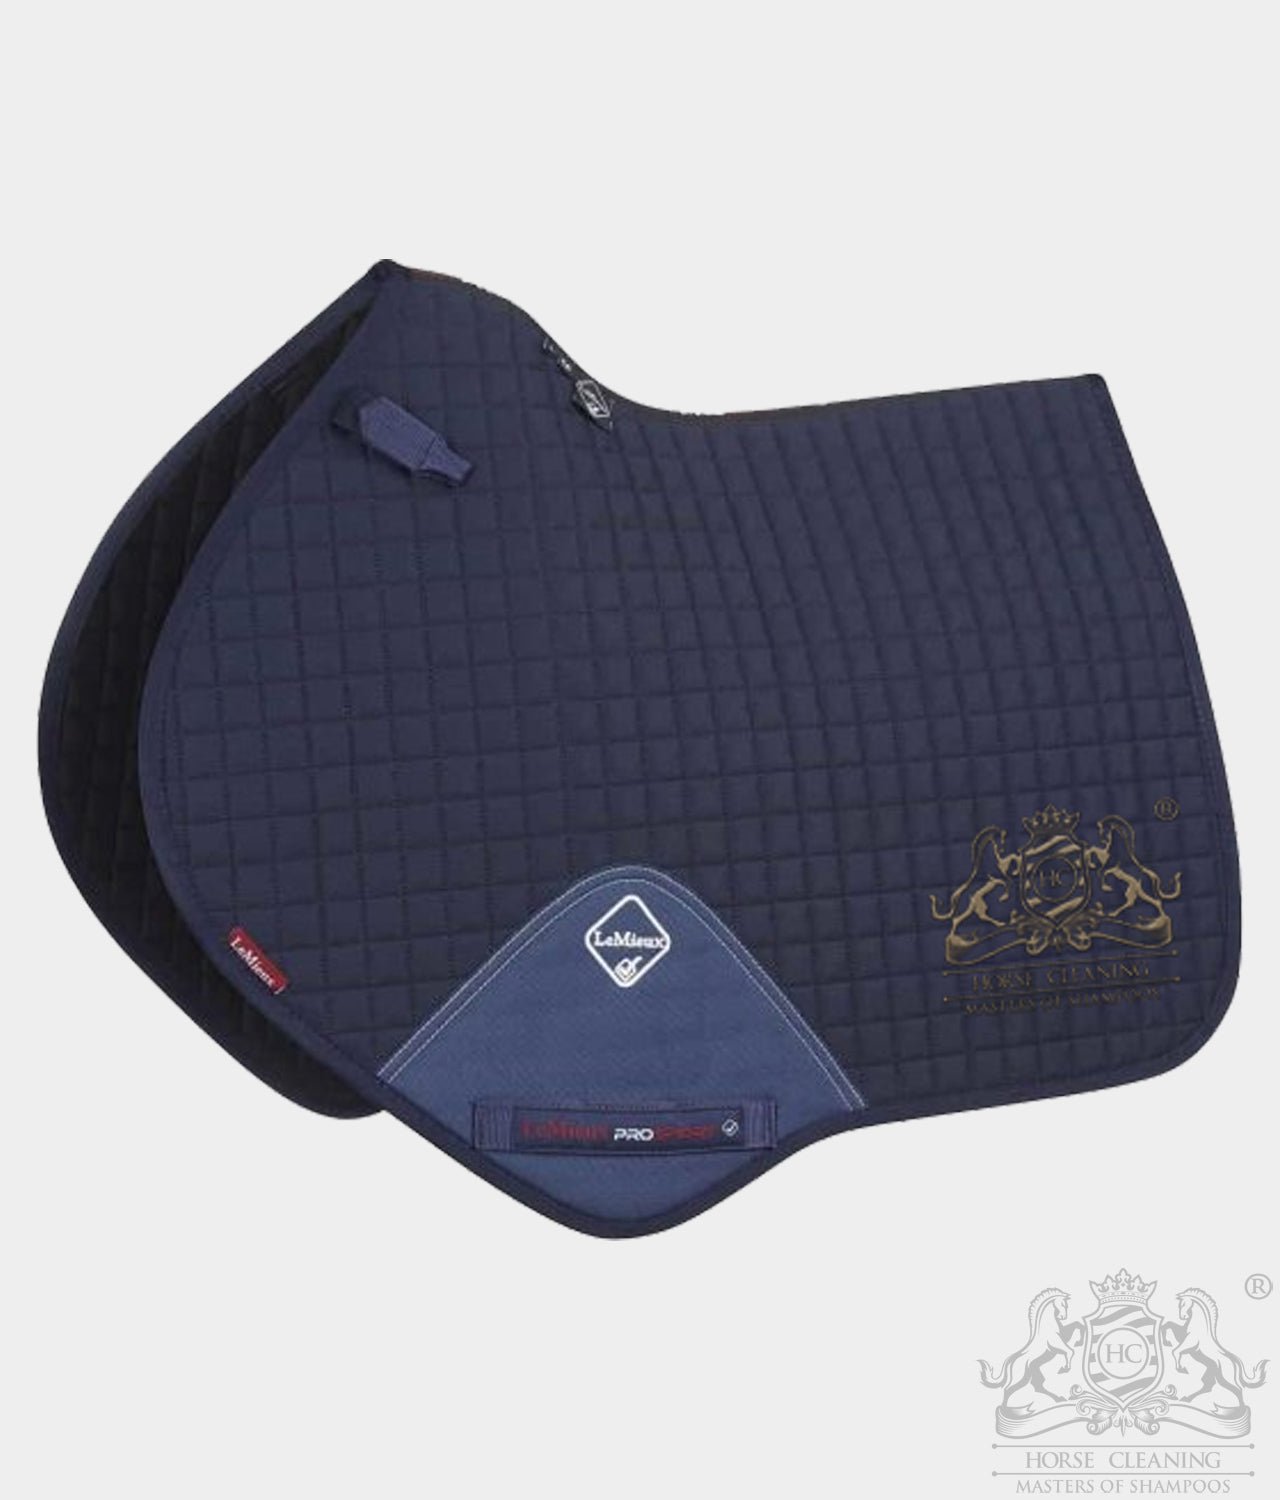 Horse Cleaning ProSport Navy Close Contact Saddle Pad - Horse Cleaning Masters Of Shampoos ™